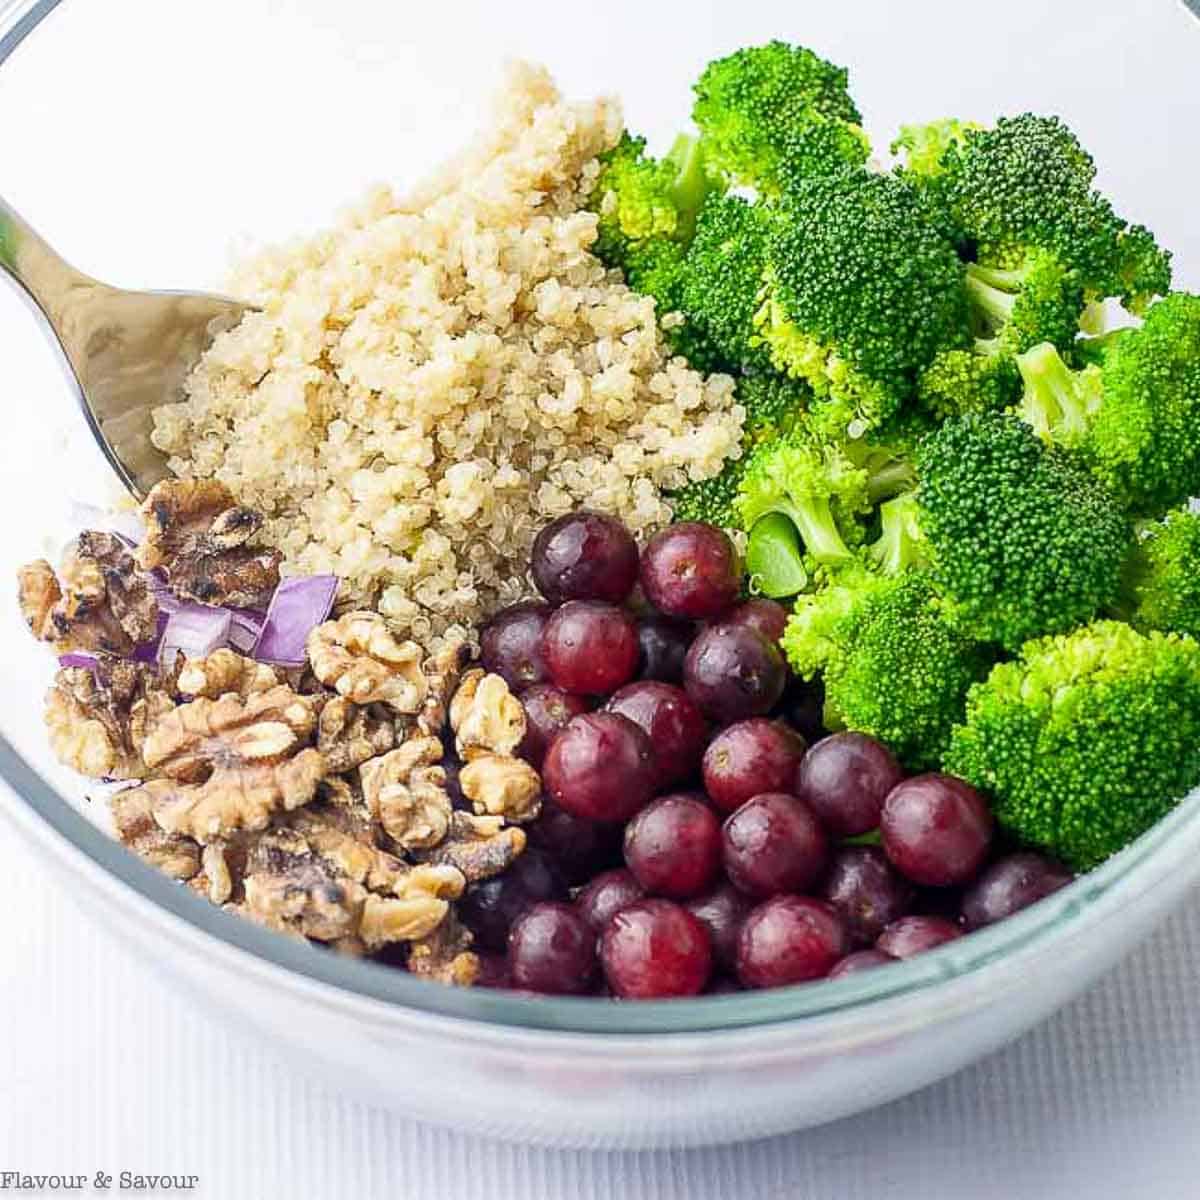 Ingredients for broccoli quinoa salad in a glass bowl - broccoli florets, red grapes, quinoa, red onion, walnuts.